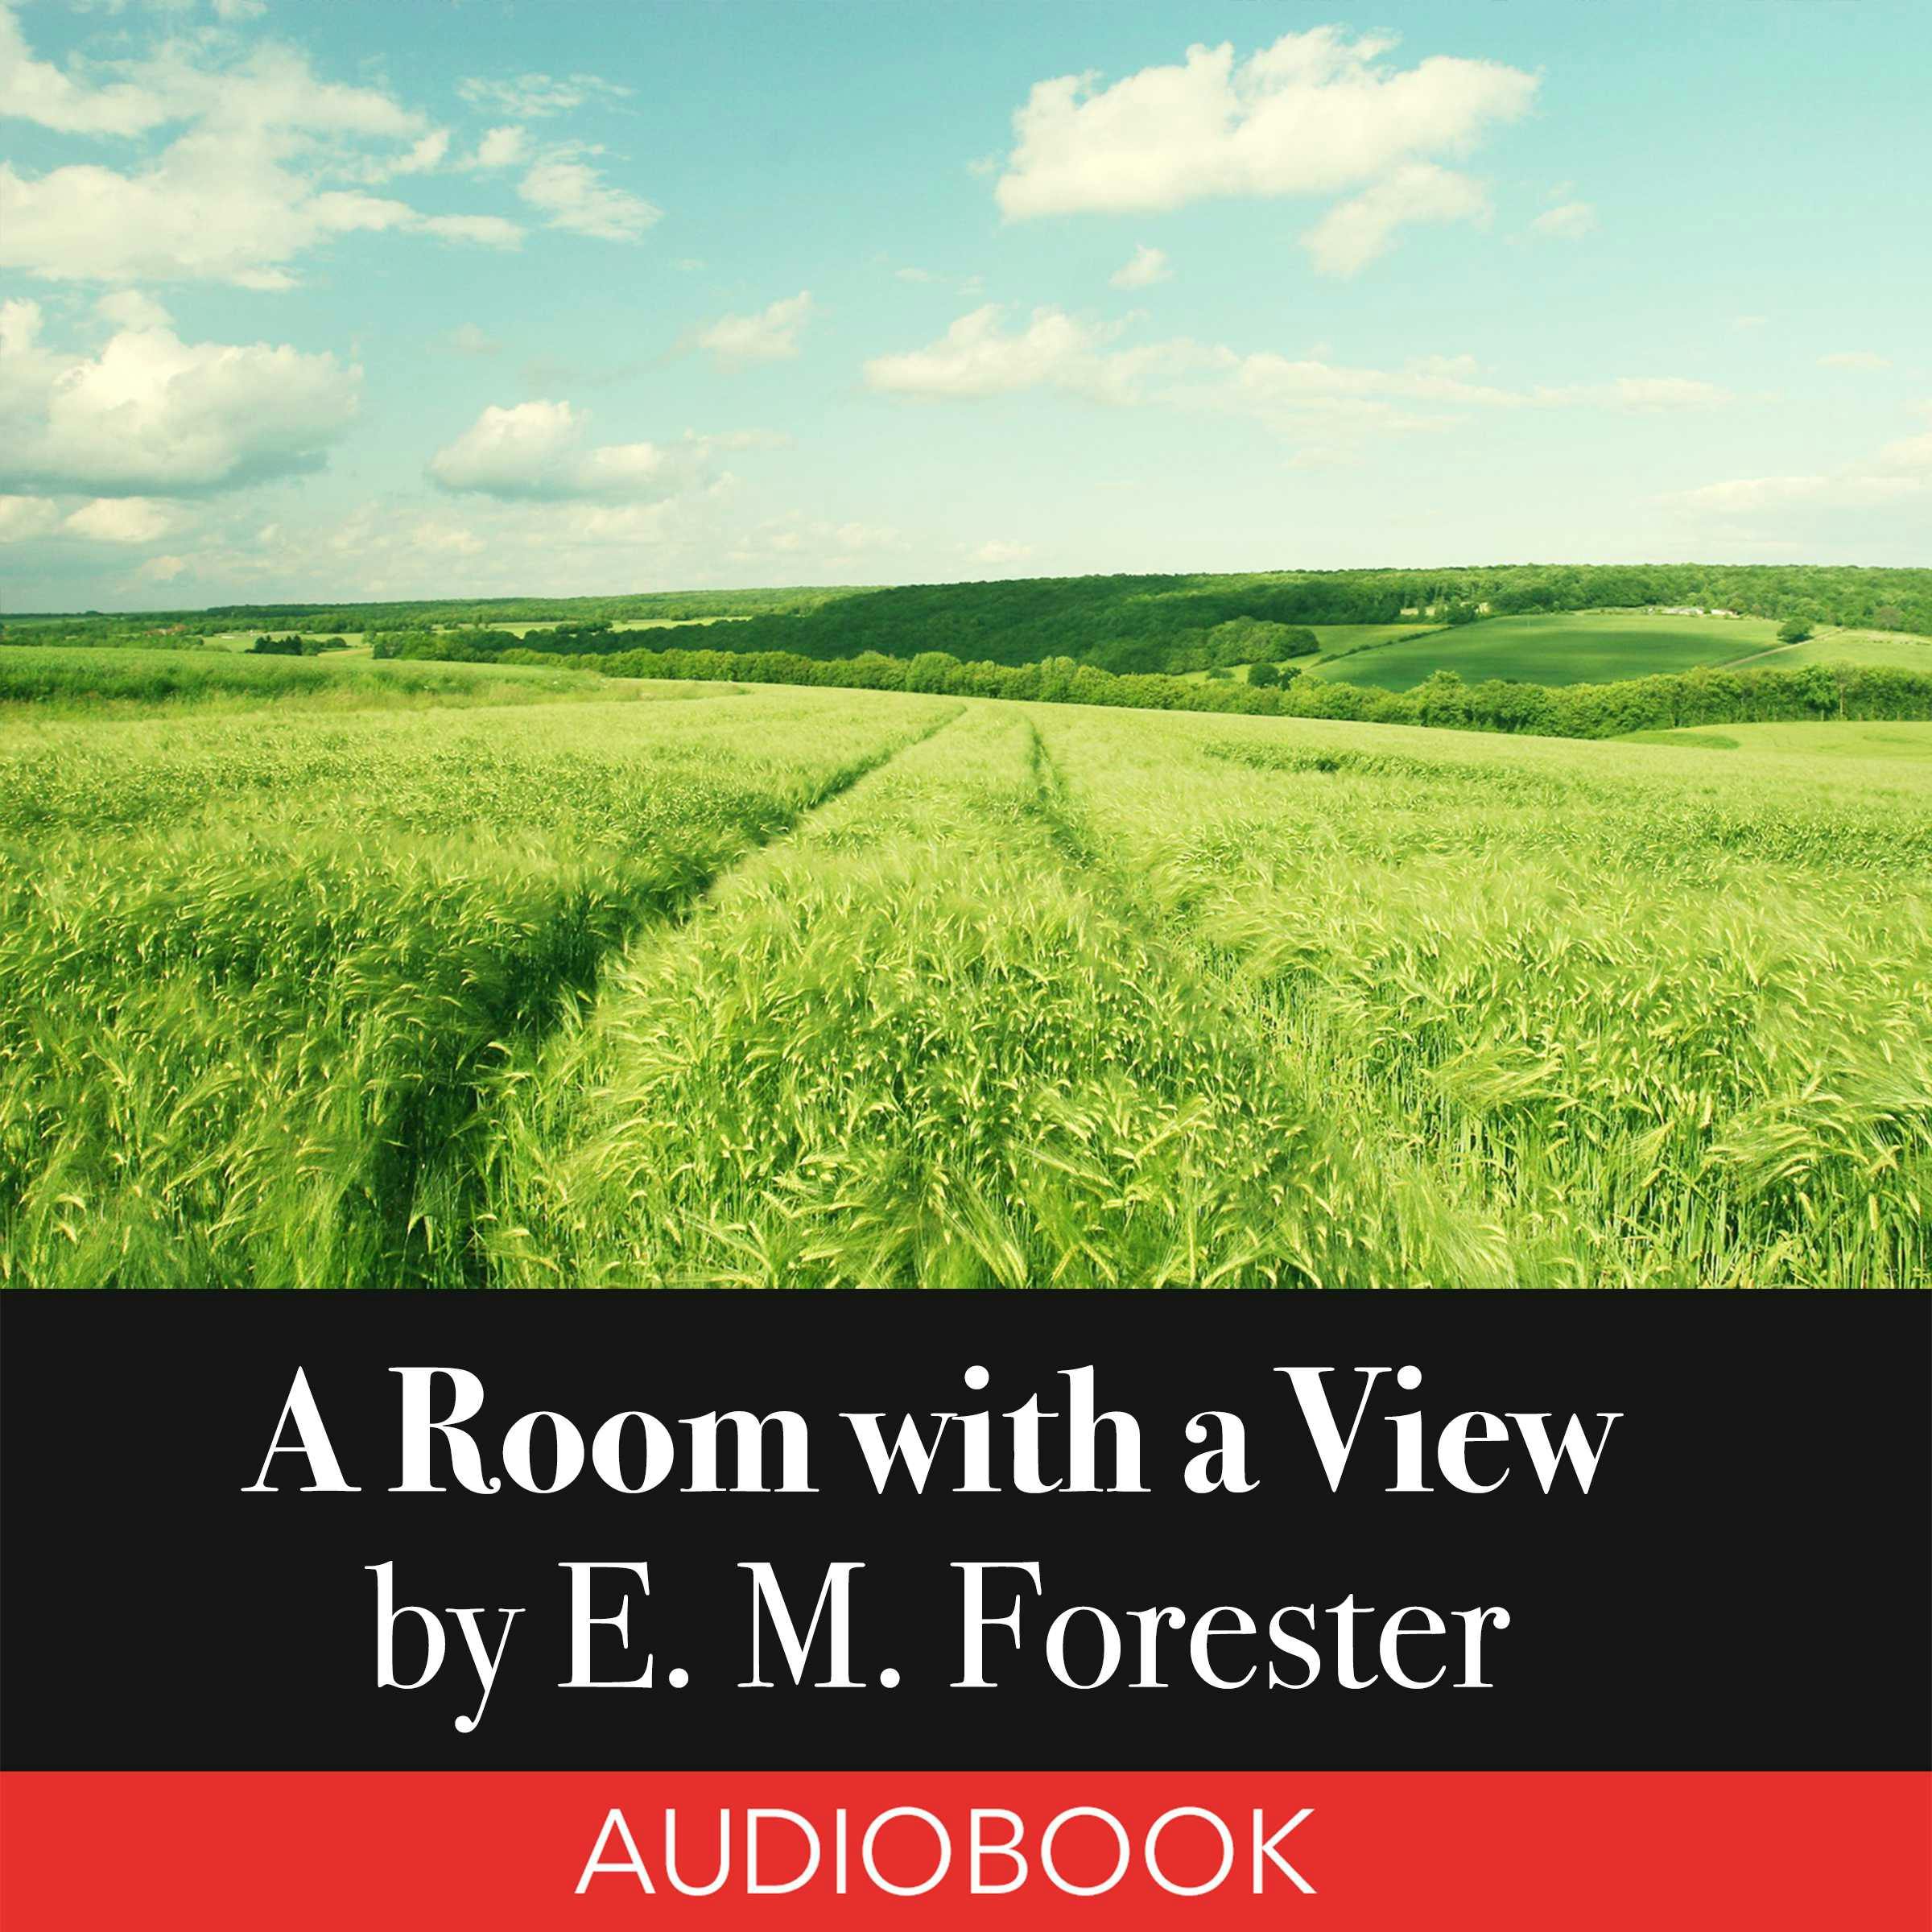 A Room with a View - E. M. Forester